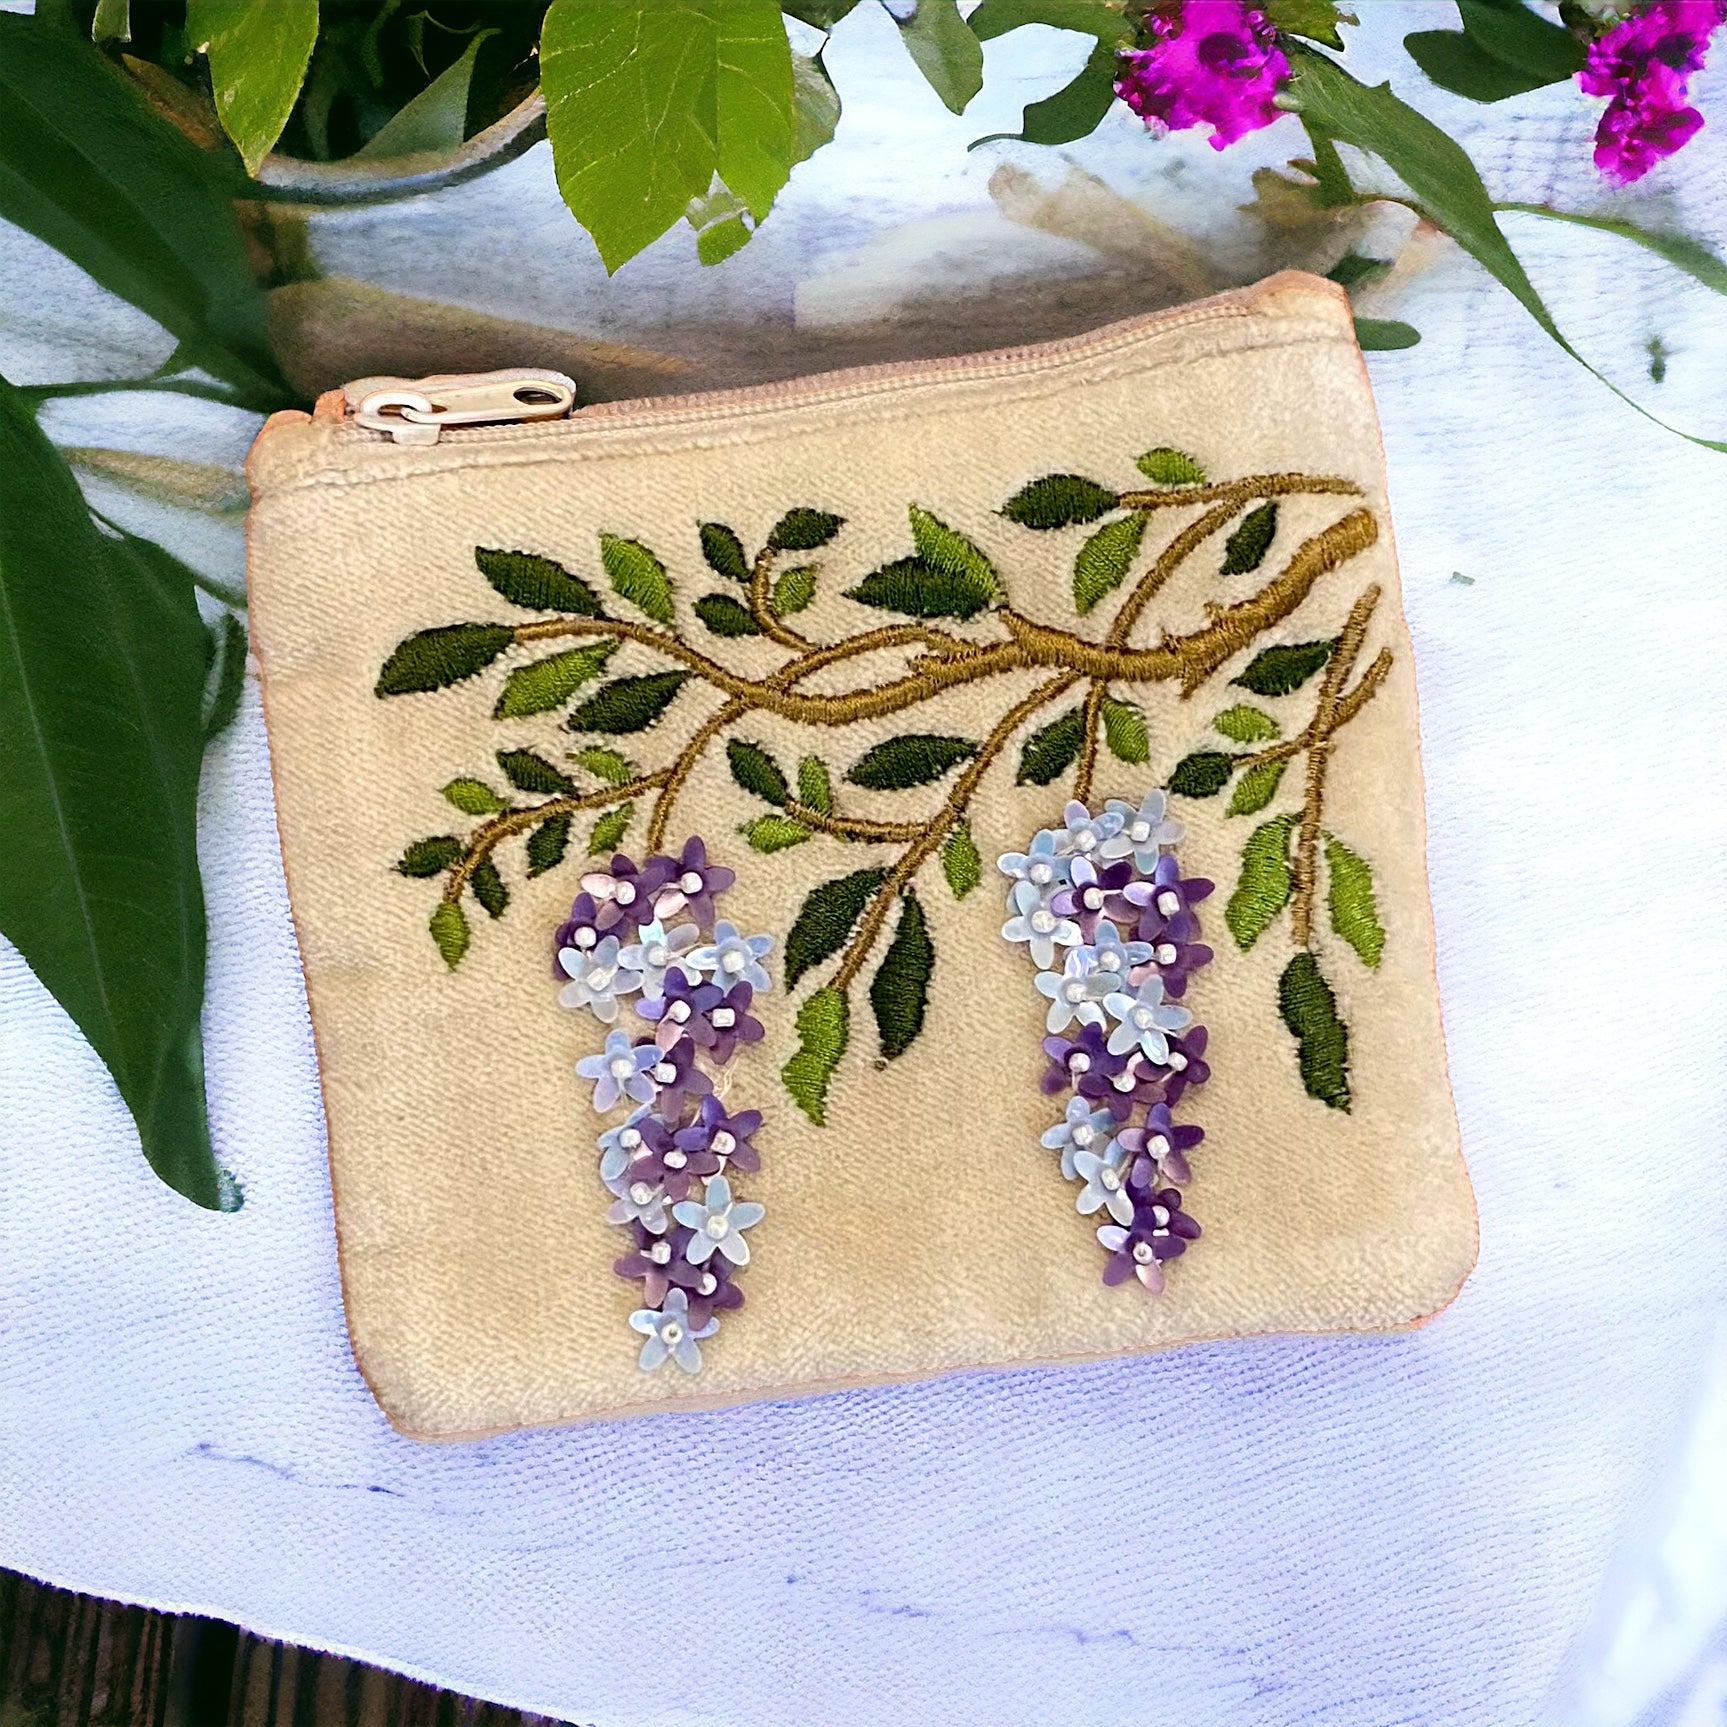 The Wisteria Cotton Velvet Purse with Shell Beading